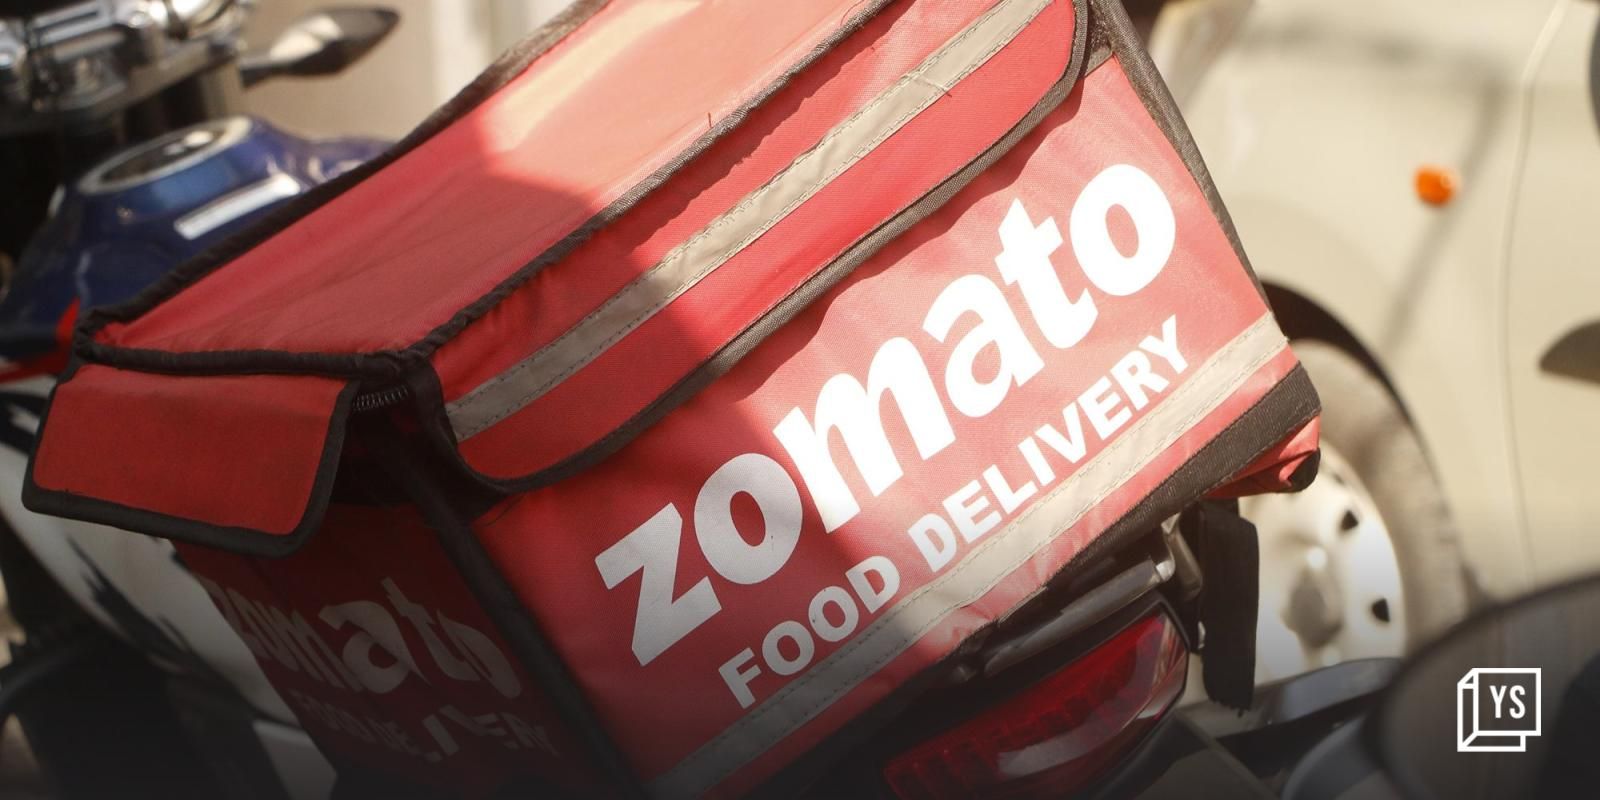 zomato share price target: Goldman Sachs believes Zomato shares could zoom  109% in blue-sky scenario - The Economic Times